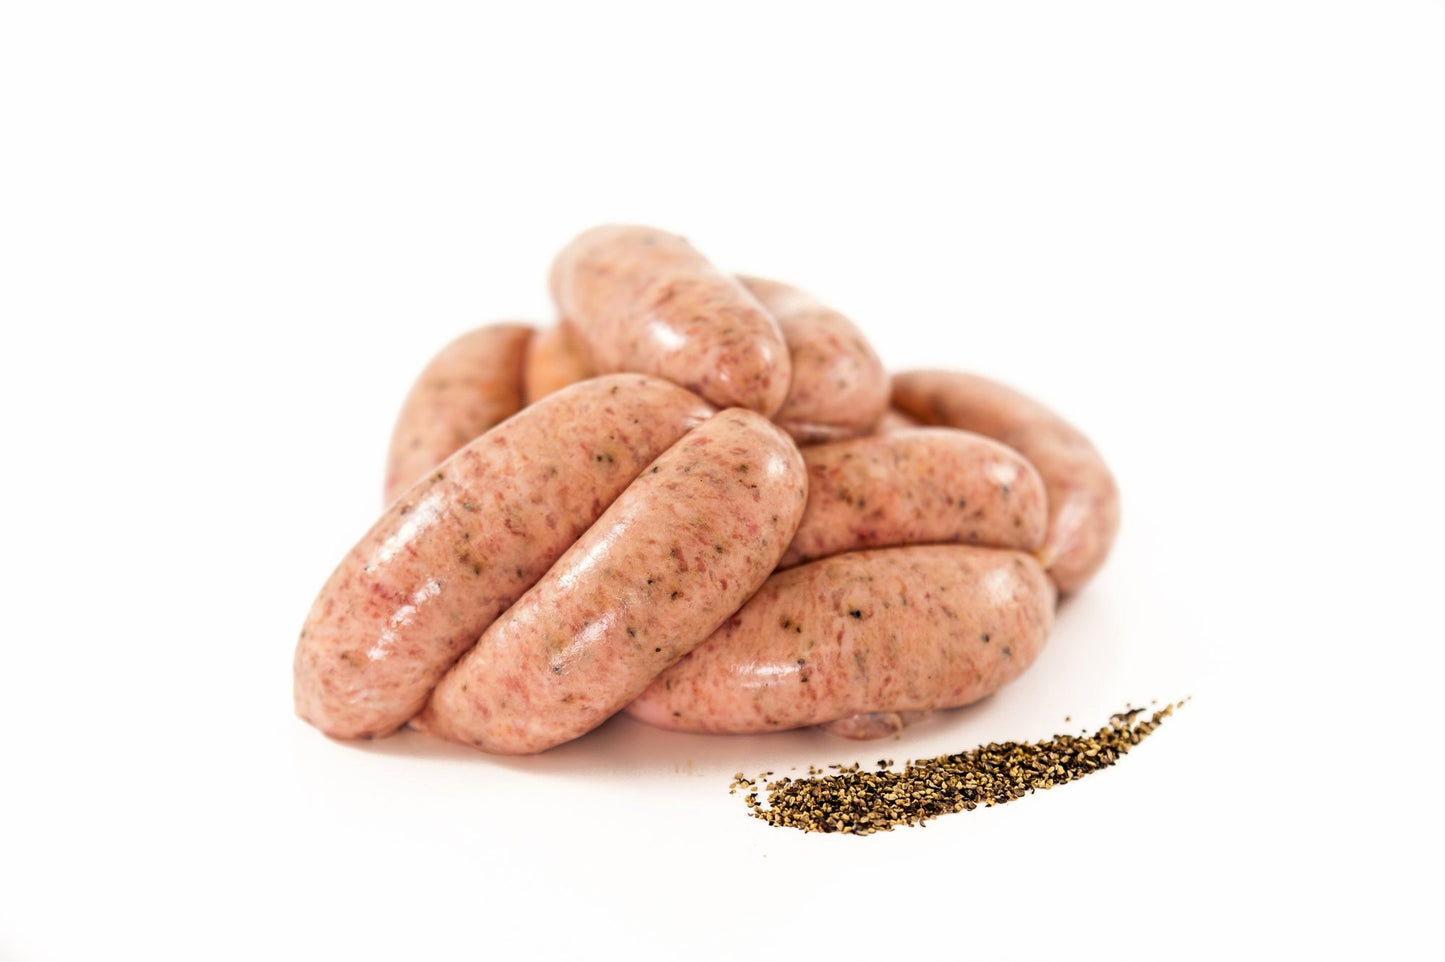 Pork Sausage with cracked black pepper 350g pack. A good meaty sausage, not too hot ! | Online Butcher Ireland